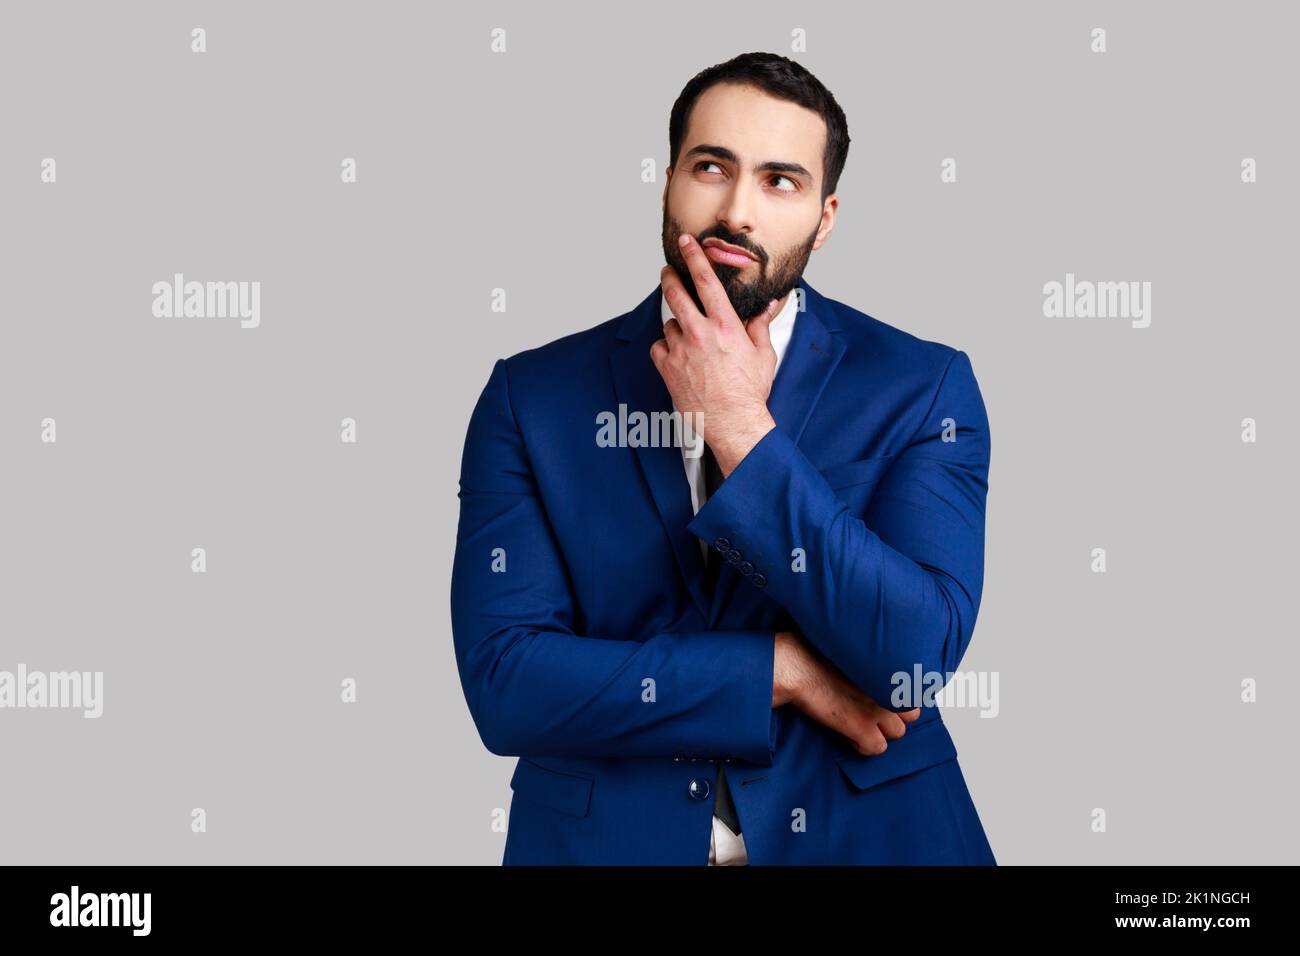 Pensive thoughtful bearded businessman holding his chin with hand, pondering about future, planning strategy, wearing official style suit. Indoor studio shot isolated on gray background. Stock Photo